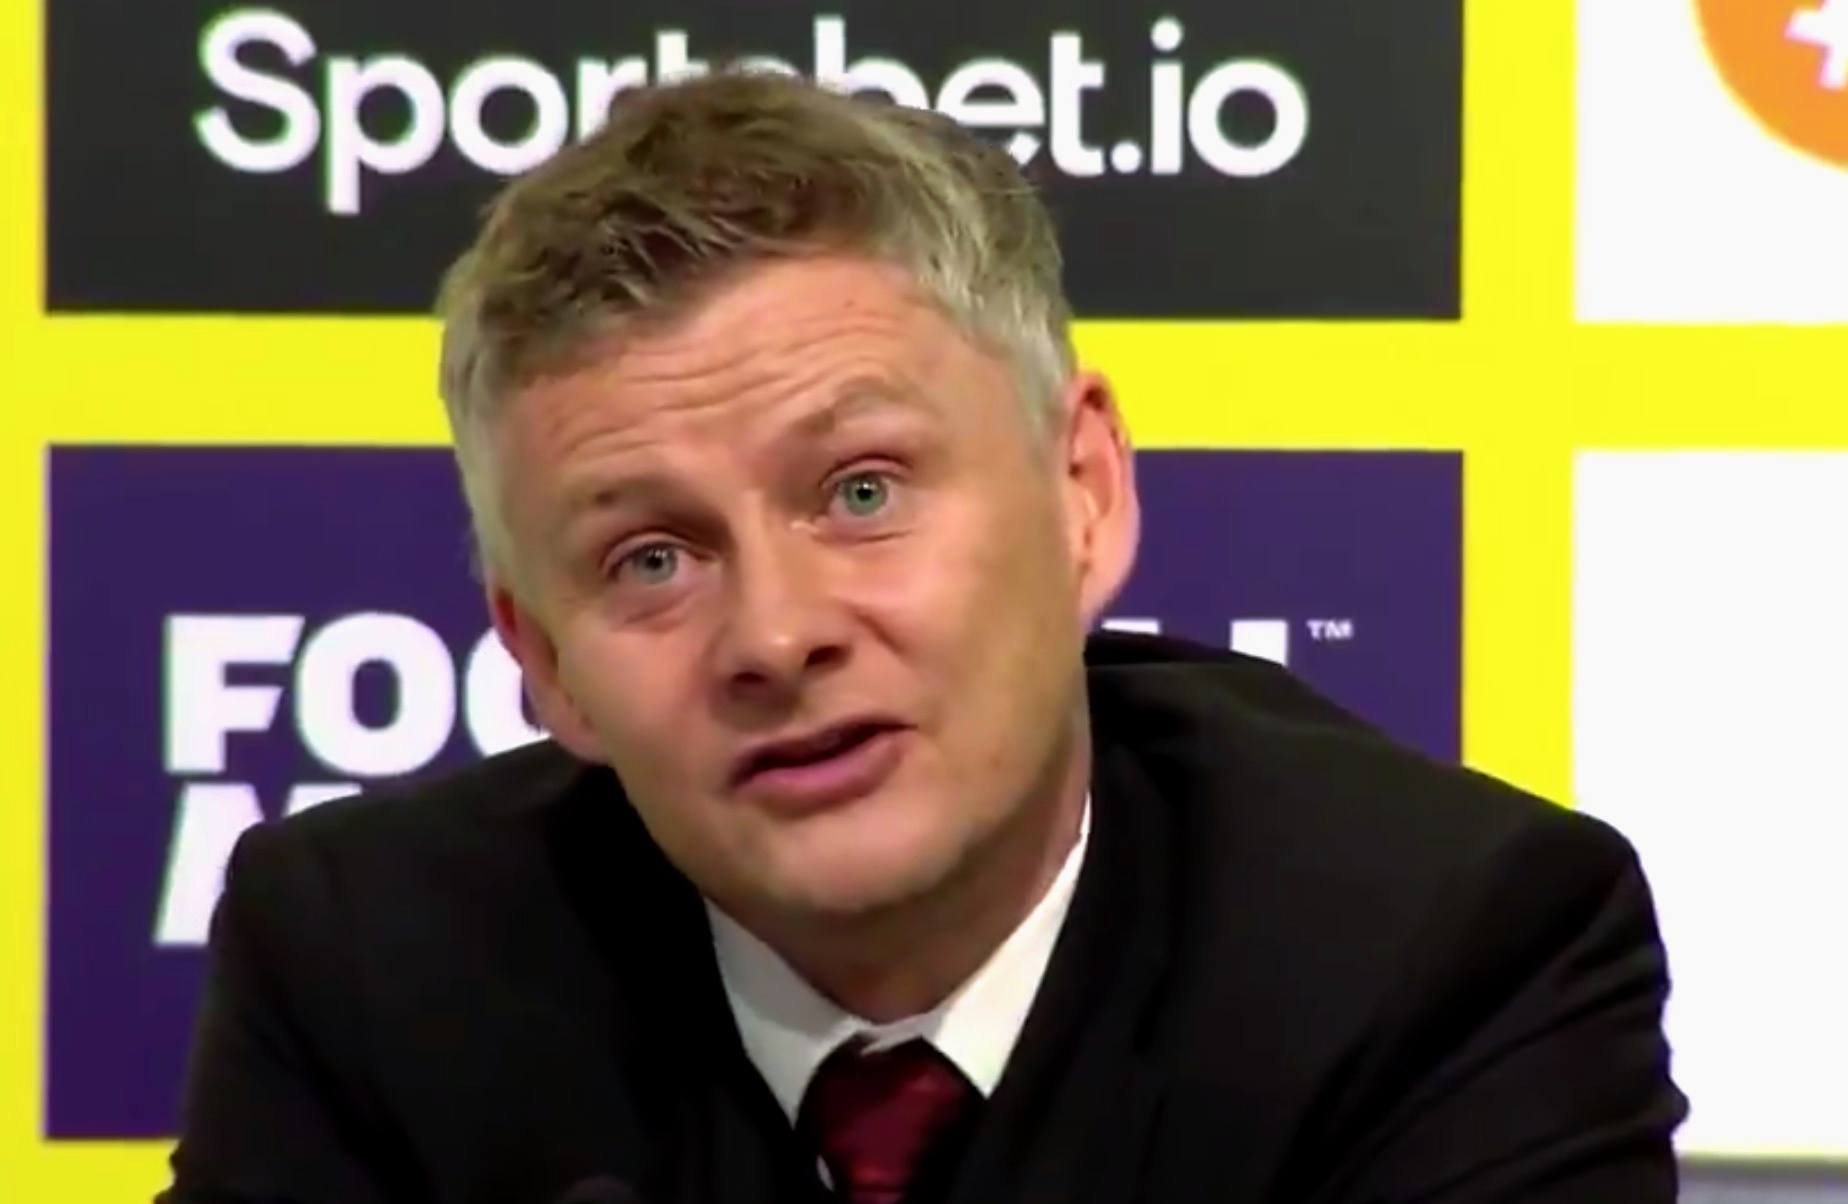 (Video) Ole Gunnar Solskjaer bizarrely hints at traffic playing a role in the loss against bottom-placed Watford